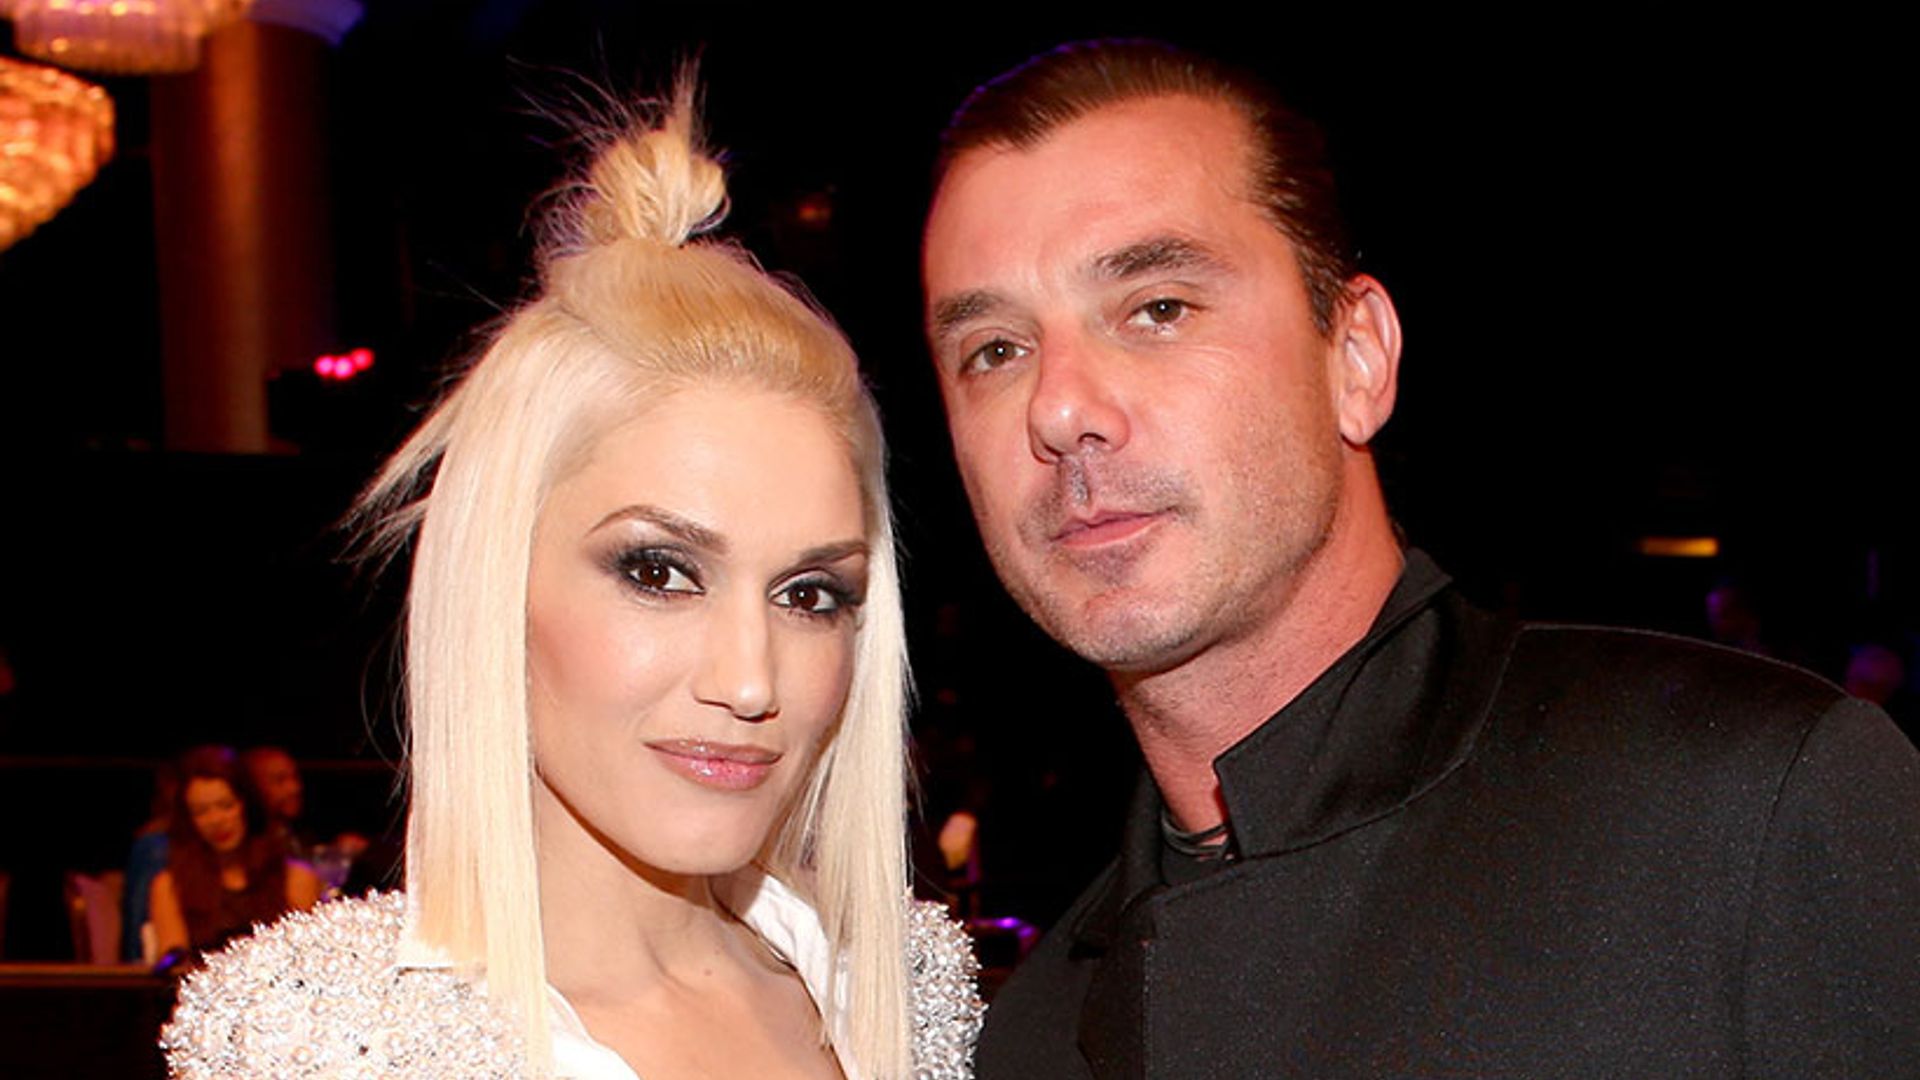 Gavin Rossdale: A look back at the Voice UK judge's past loves